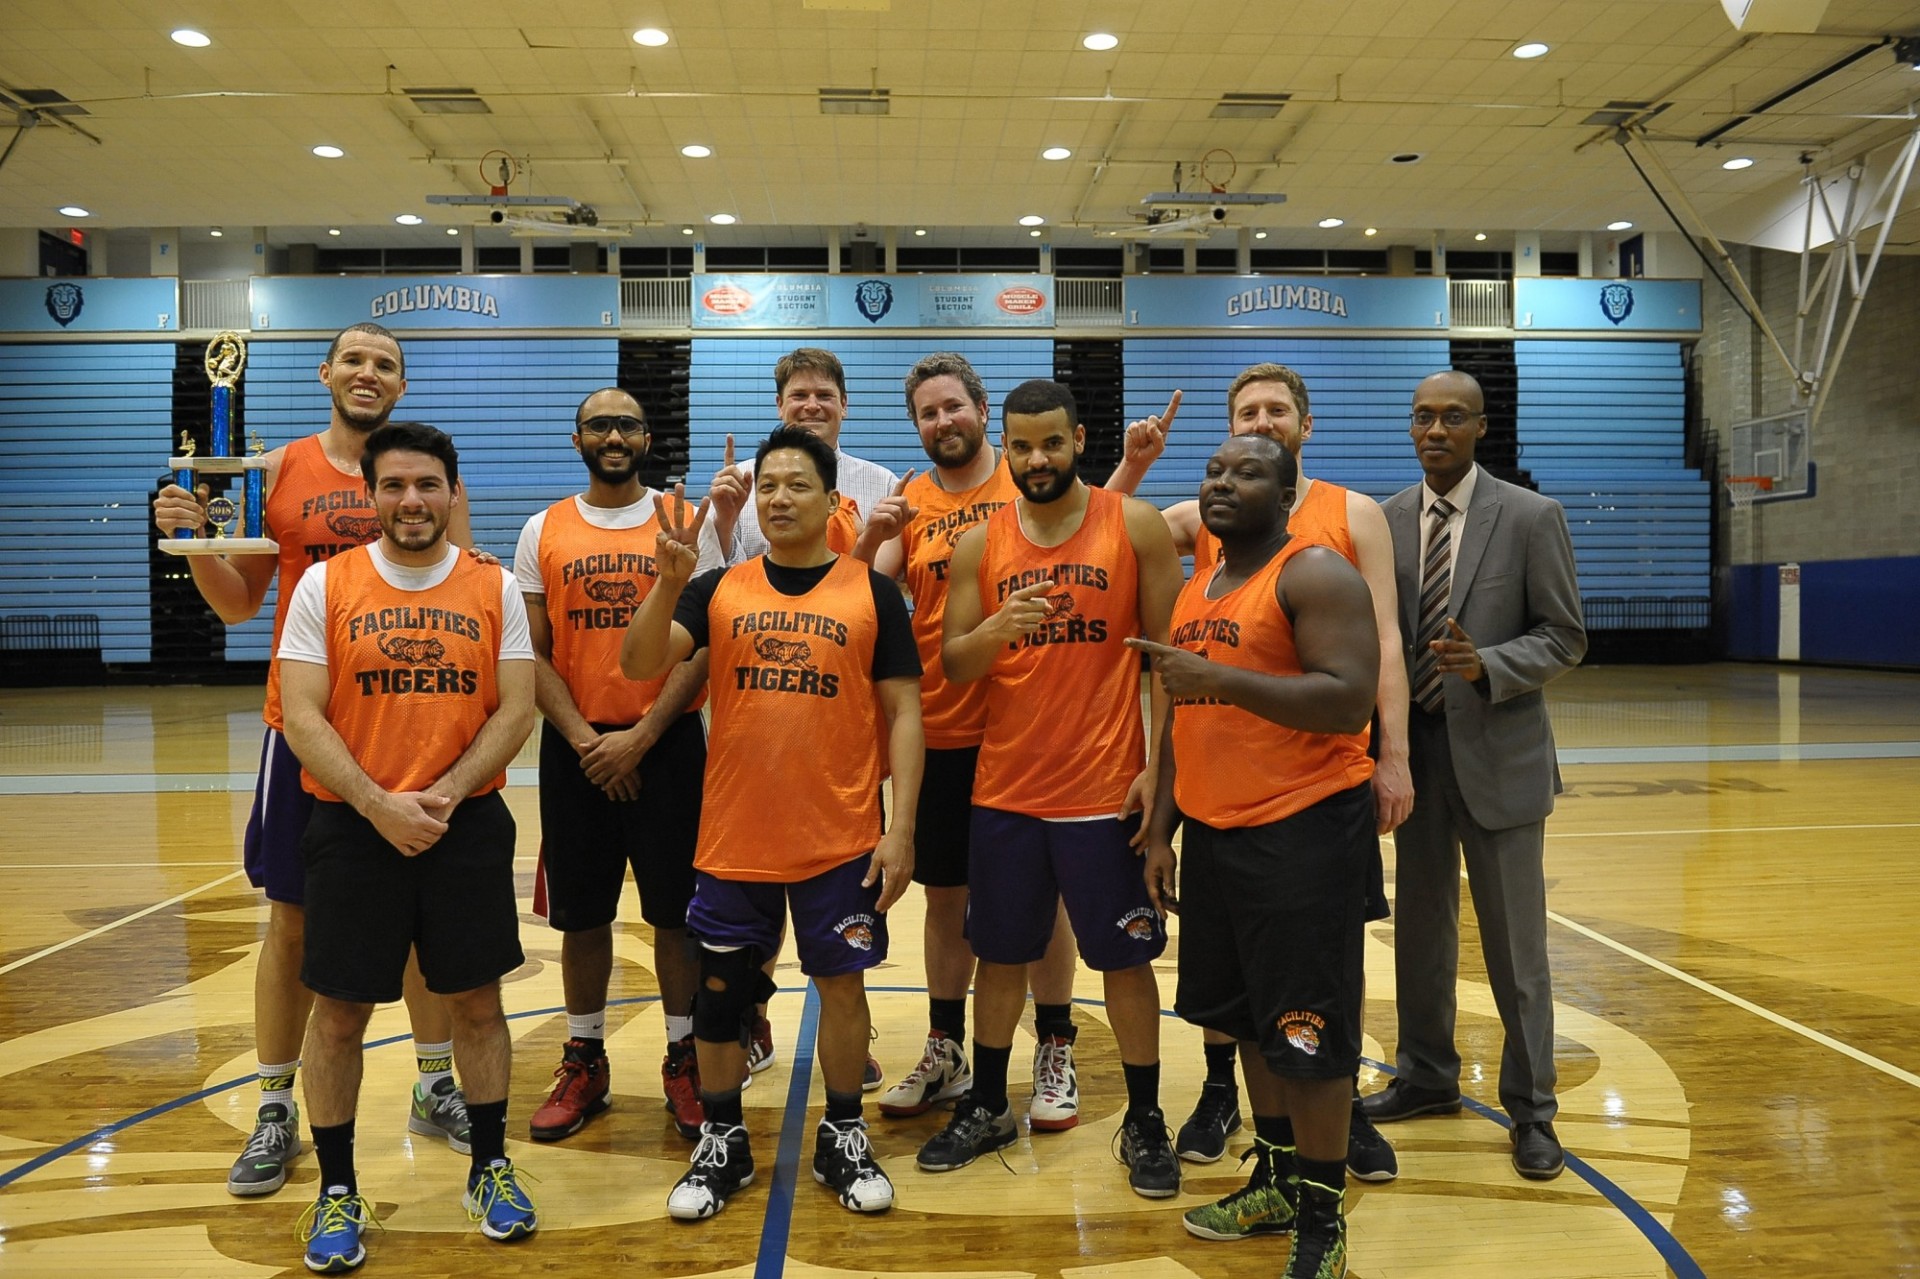 A group of people stand in orange "Facilities Tigers" jerseys inside of Levien Gym, with someone on the far left holding a trophy.